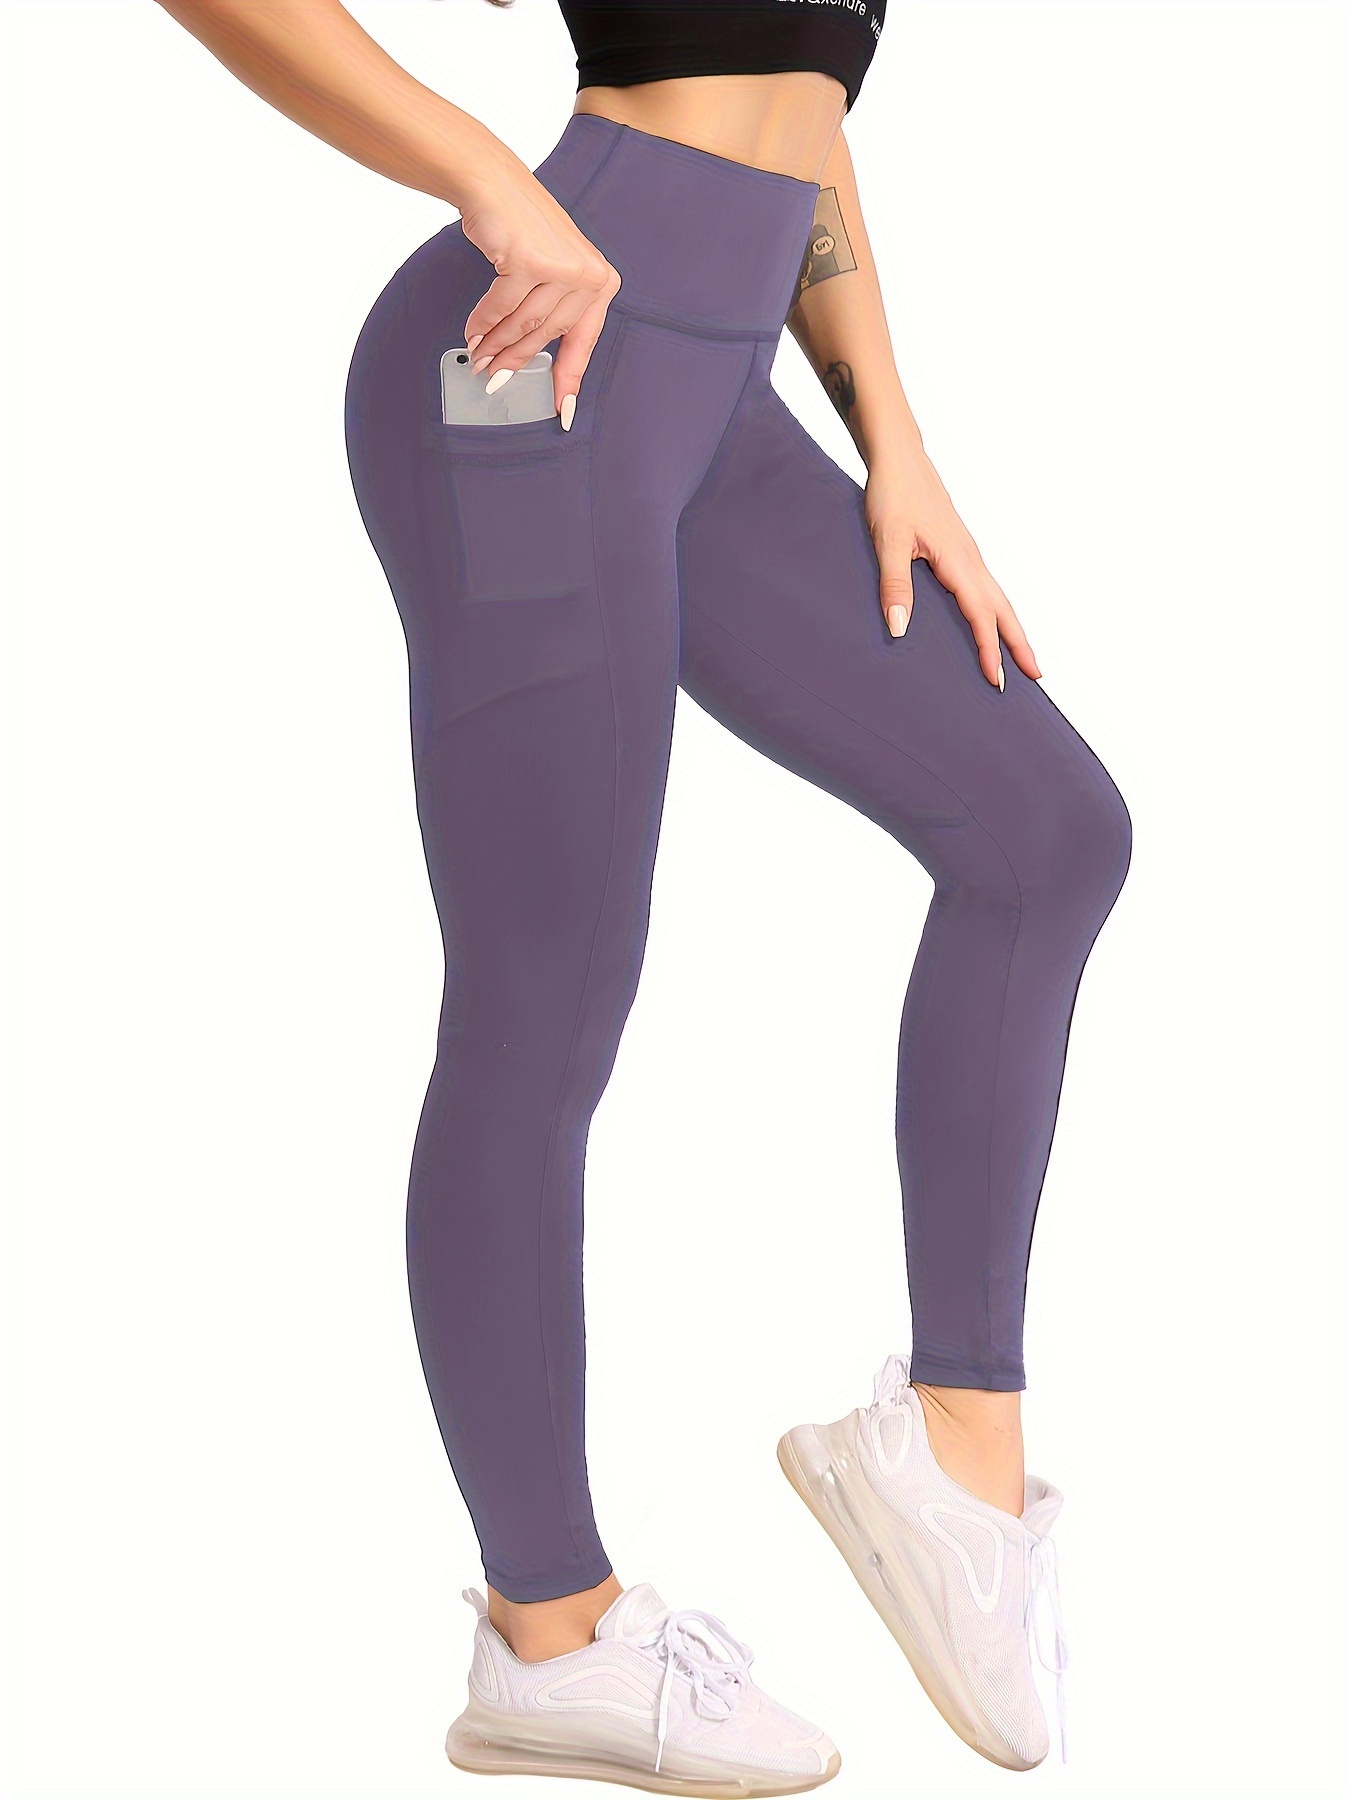 Seamless High Waist Stretchy Sports Tight Pants With Pocket, Slimming Yoga  Fitness Workout Gym Exercise Leggings, Women's Activewear